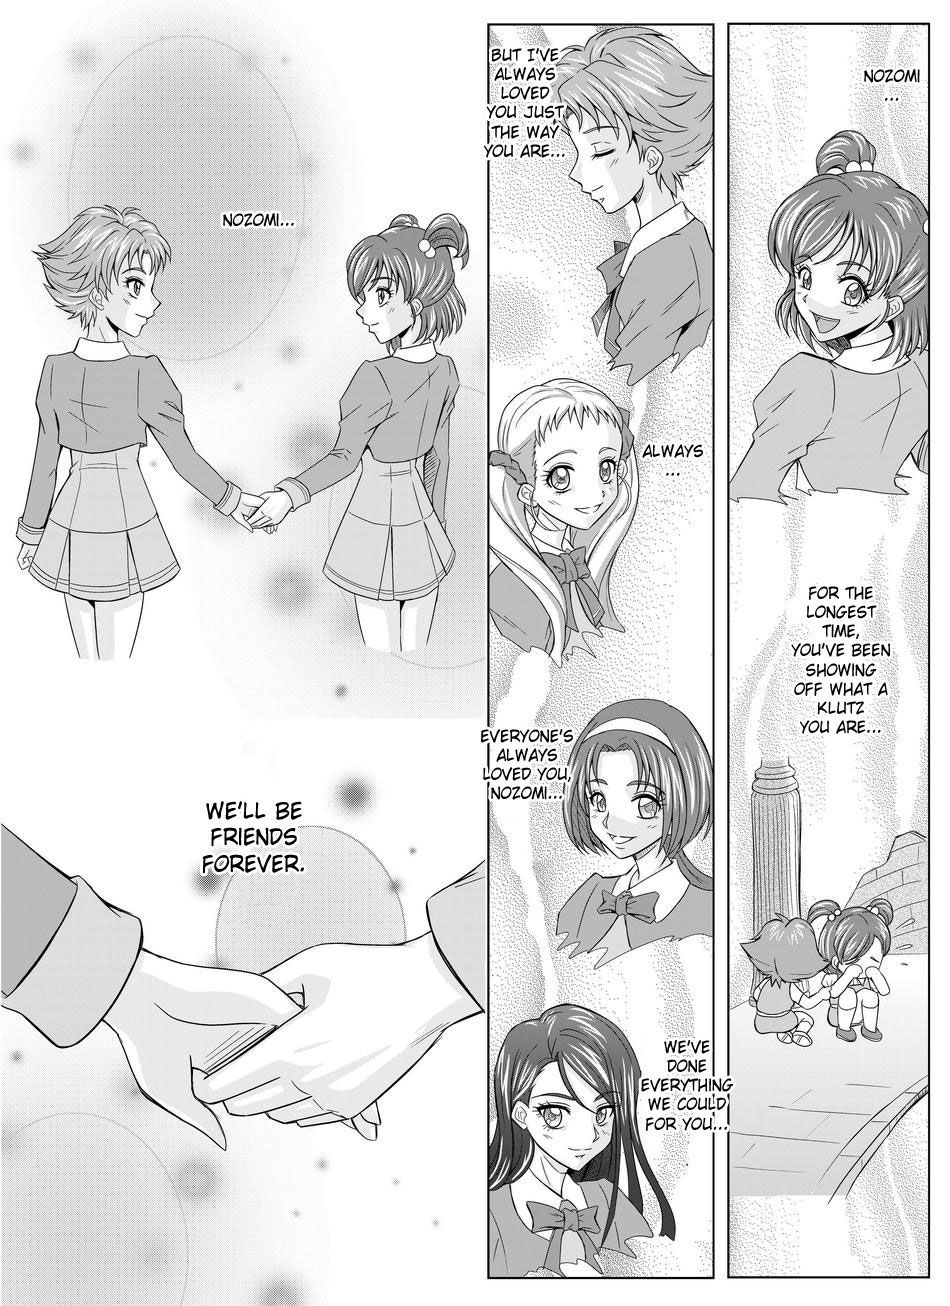 [Macxes] Another Conclusion 2 (Pretty Cure) [English][SaHa] 